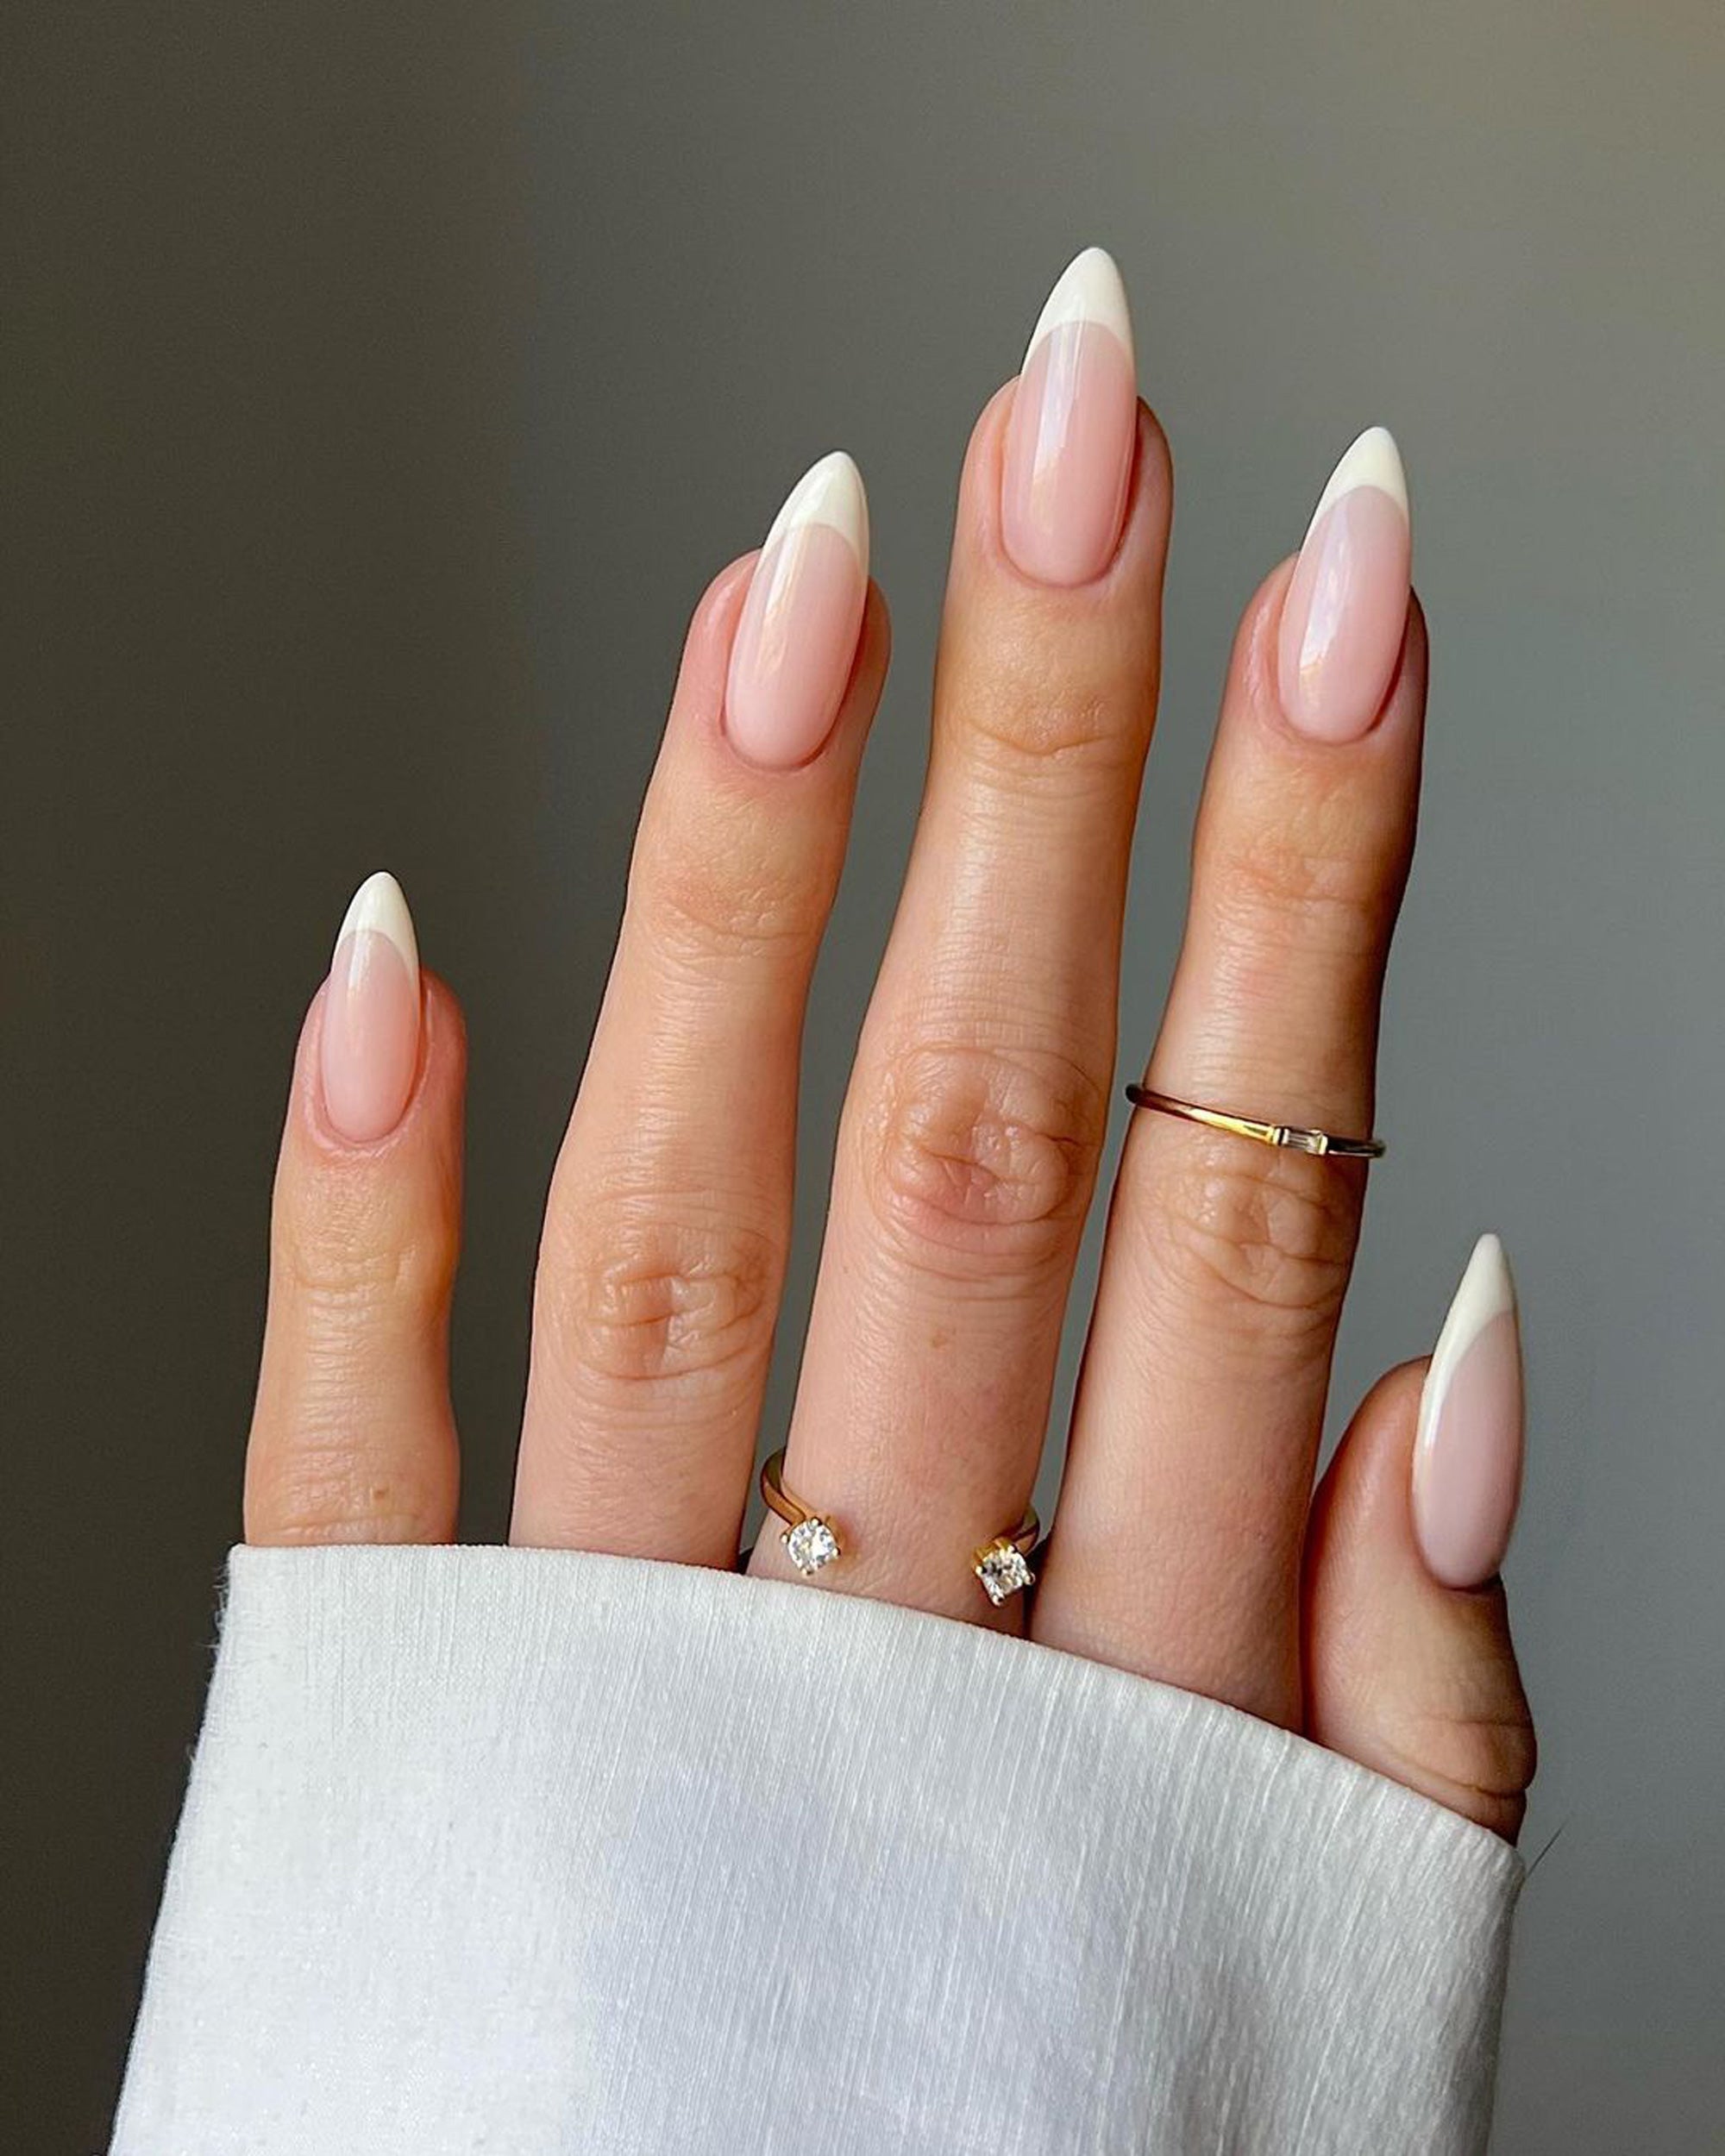 How To Build List Of Nail Salon Services in 2023 | zolmi.com